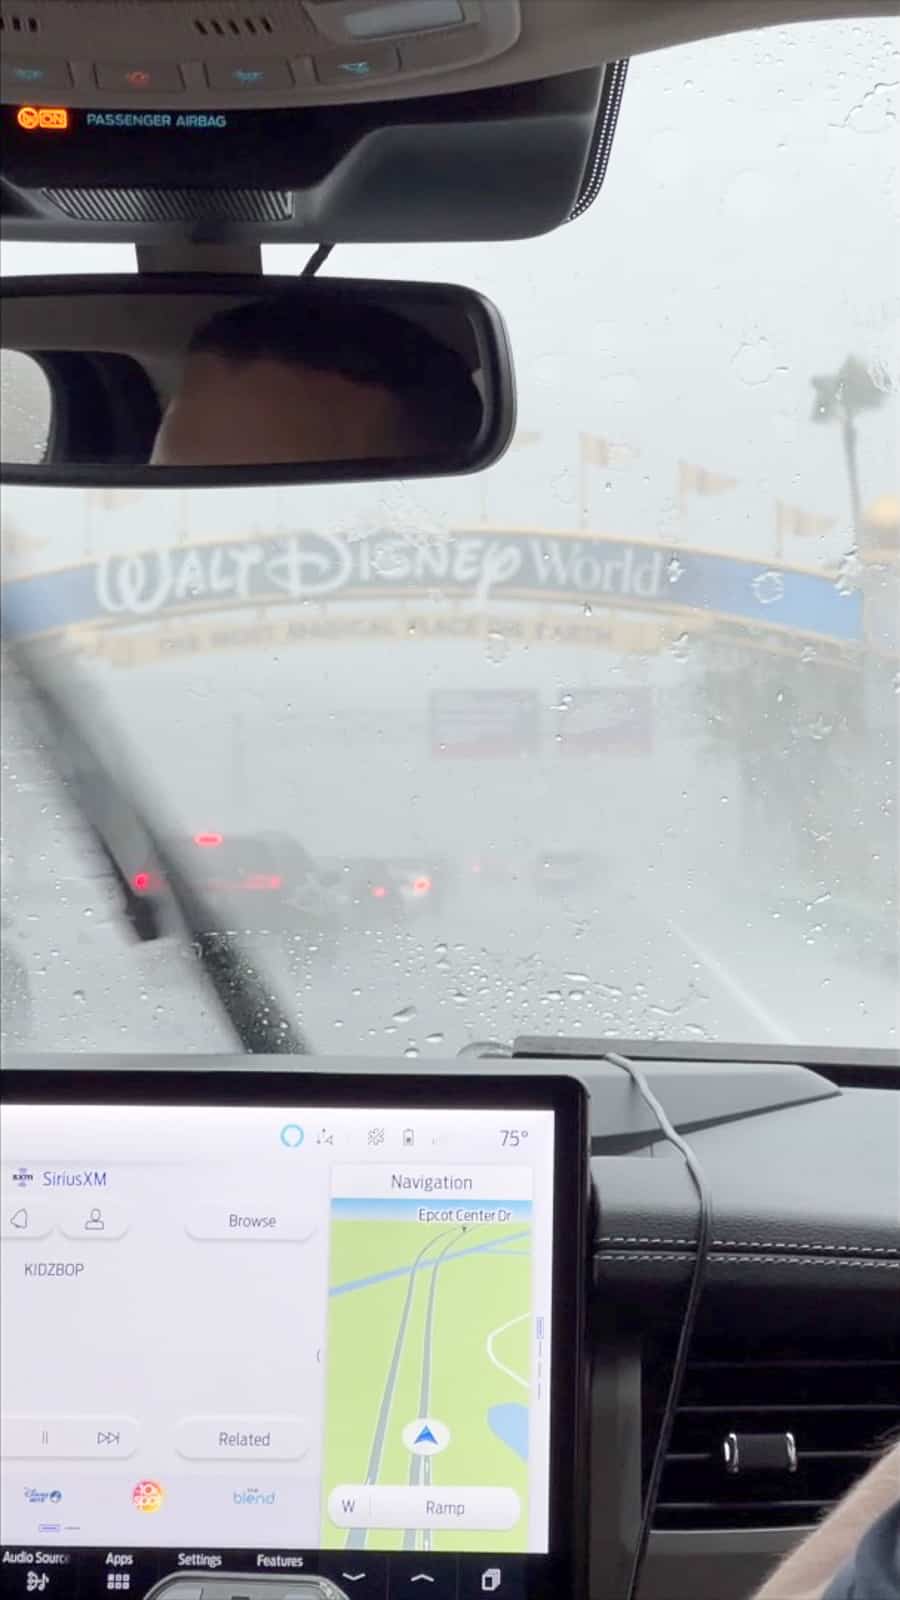 Driving to Walt Disney World from MCO Airport in a rideshare Uber while it is raining